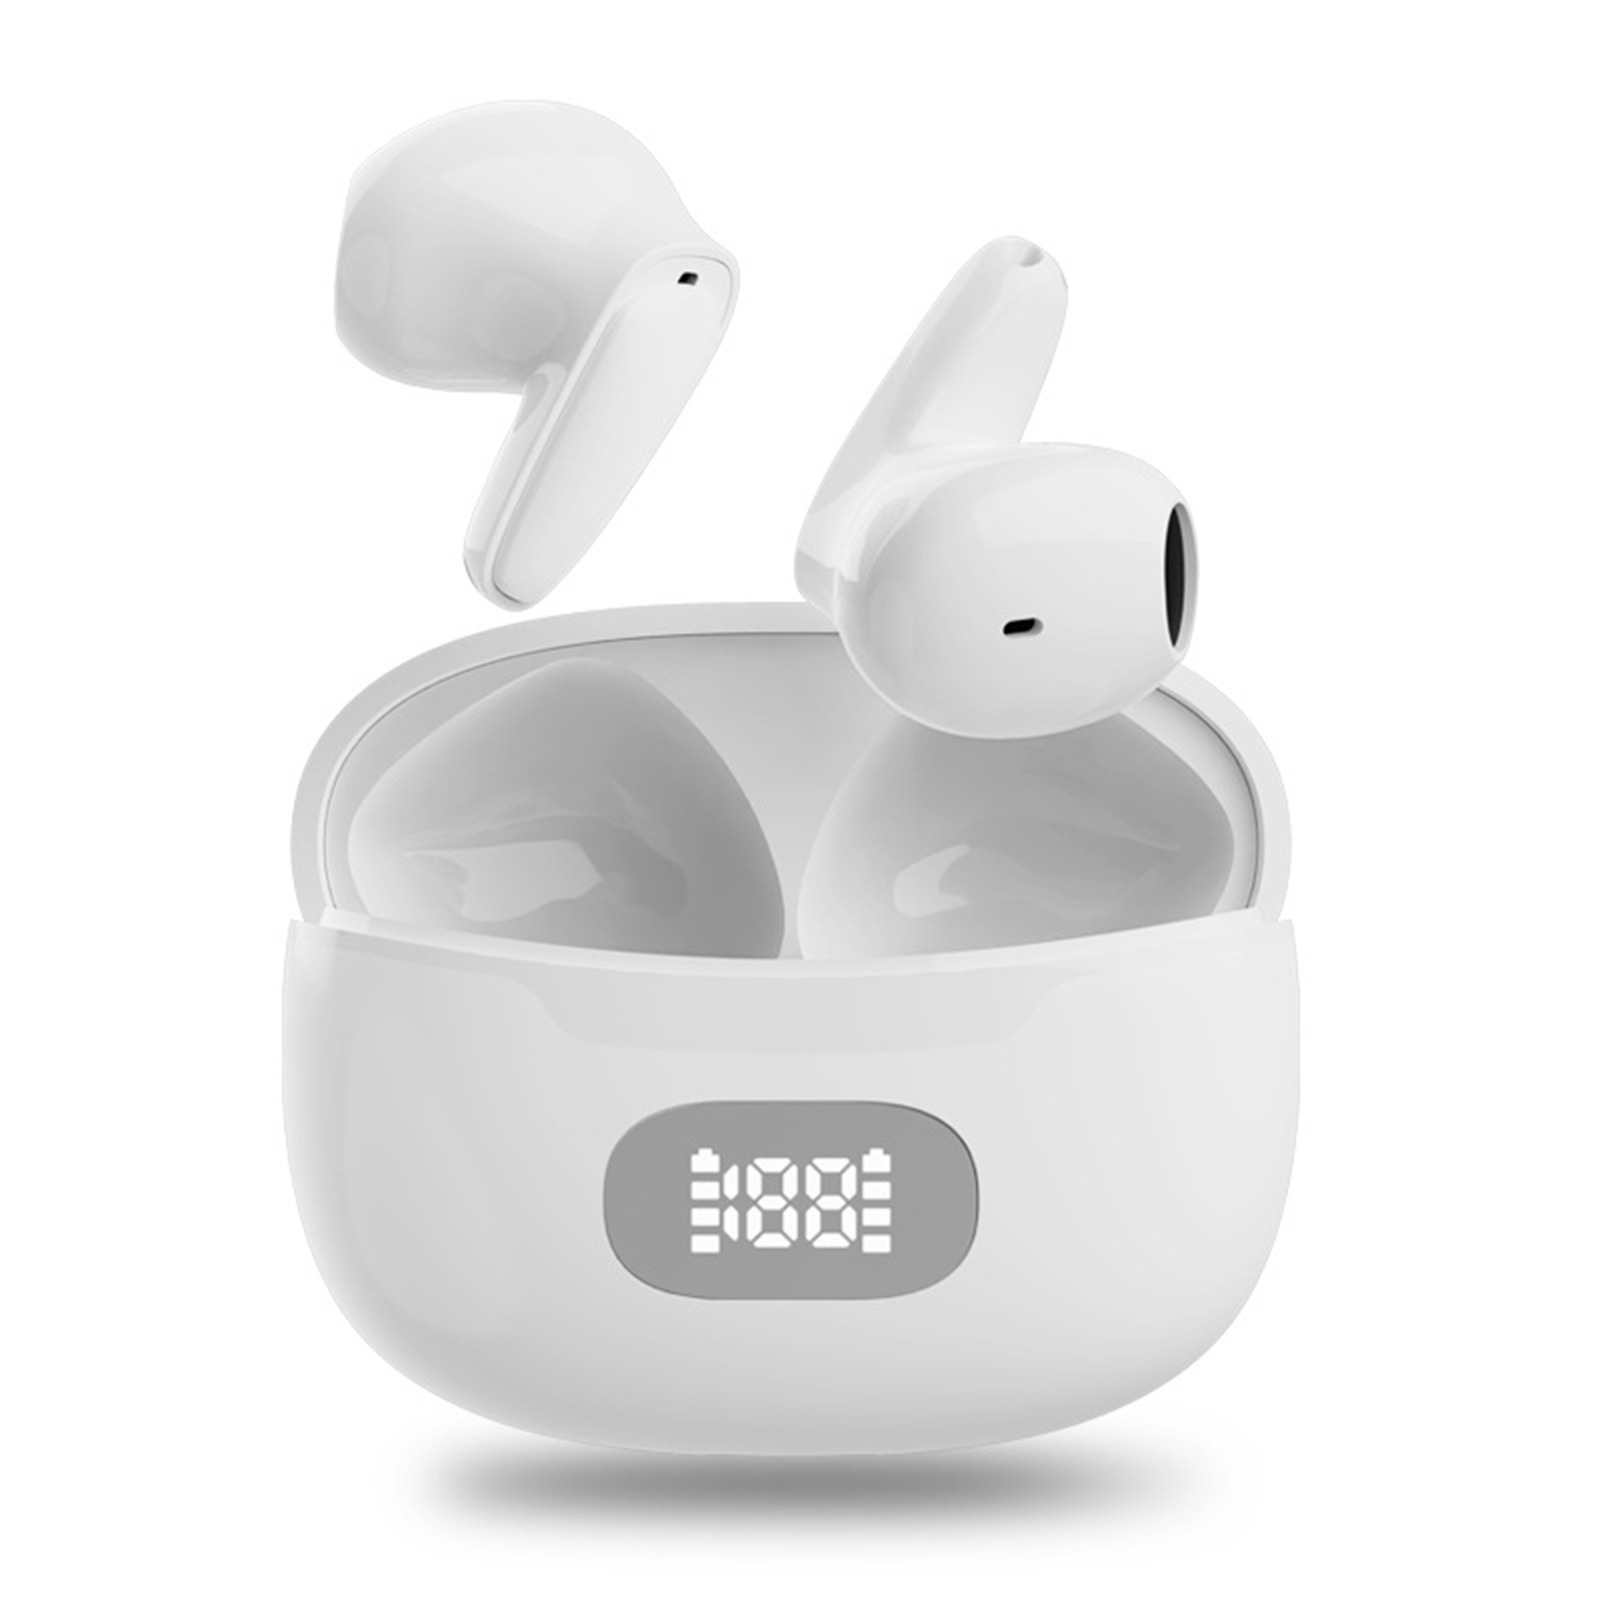 Wireless Earbuds In-Ear Stereo Headphones With Charging Case Waterproof Noise Canceling Earphones For Sports Gaming White